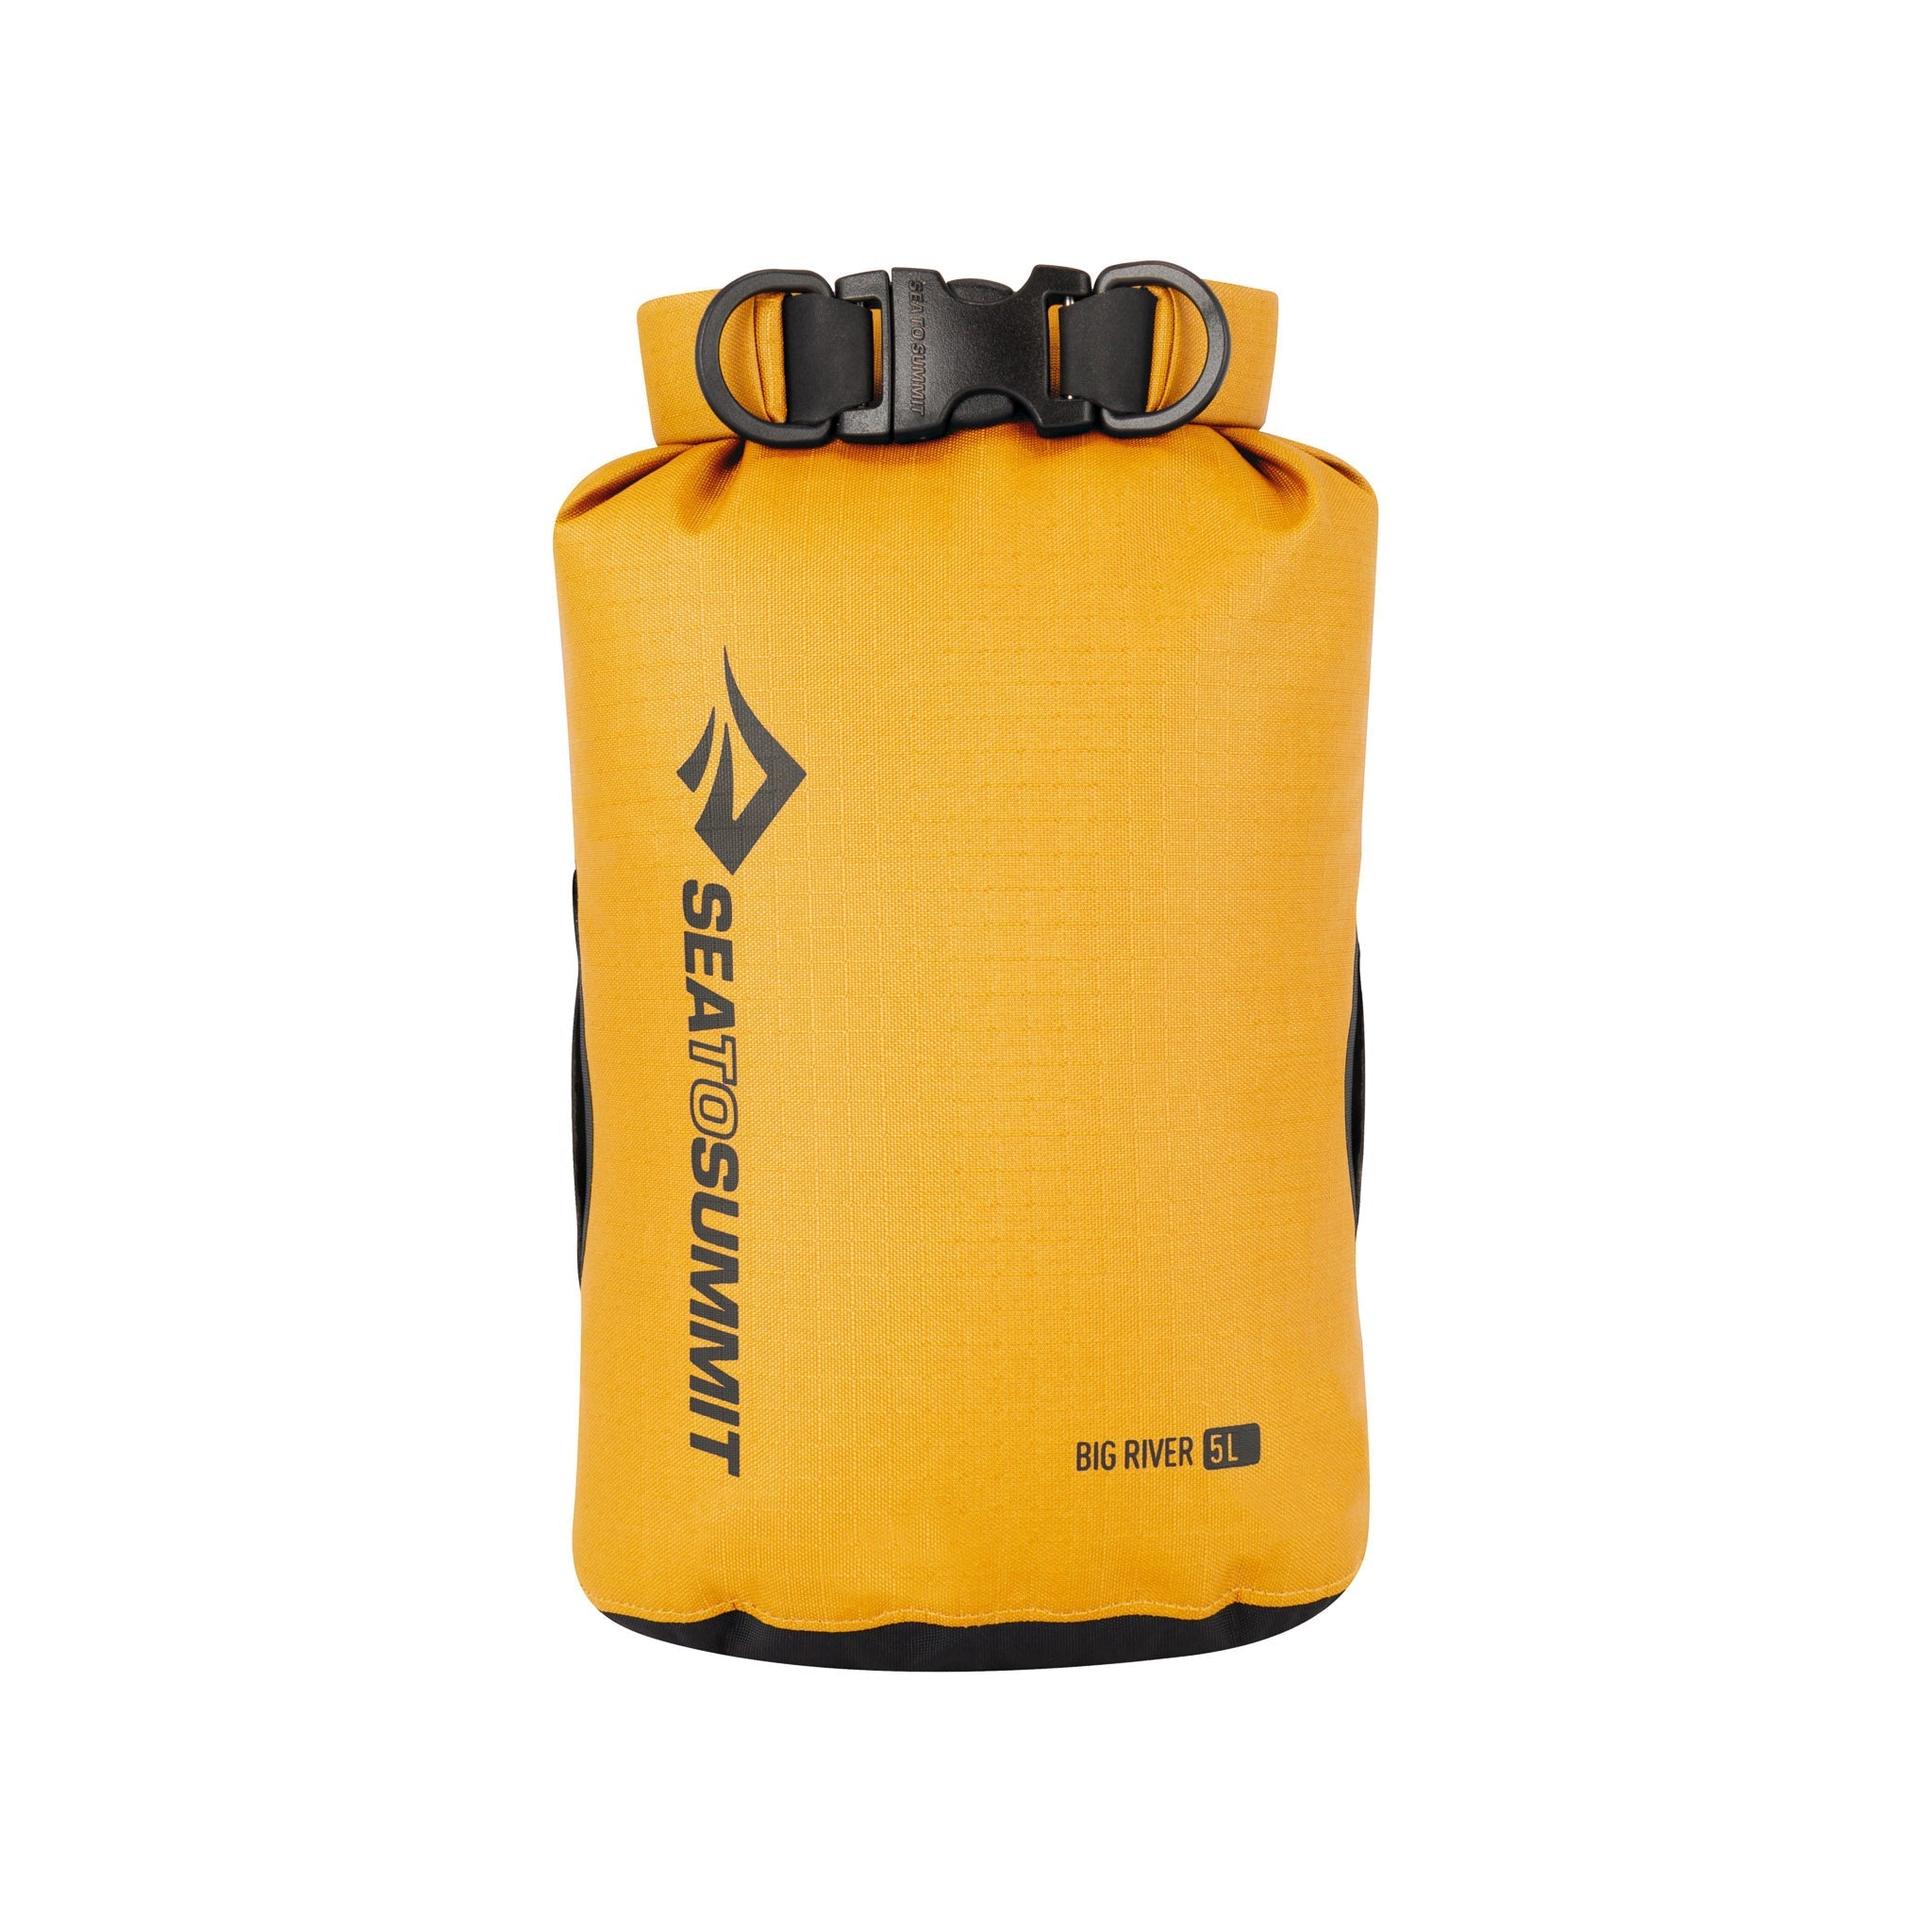 5 litre / Yellow || Big River Dry Bag in Yellow